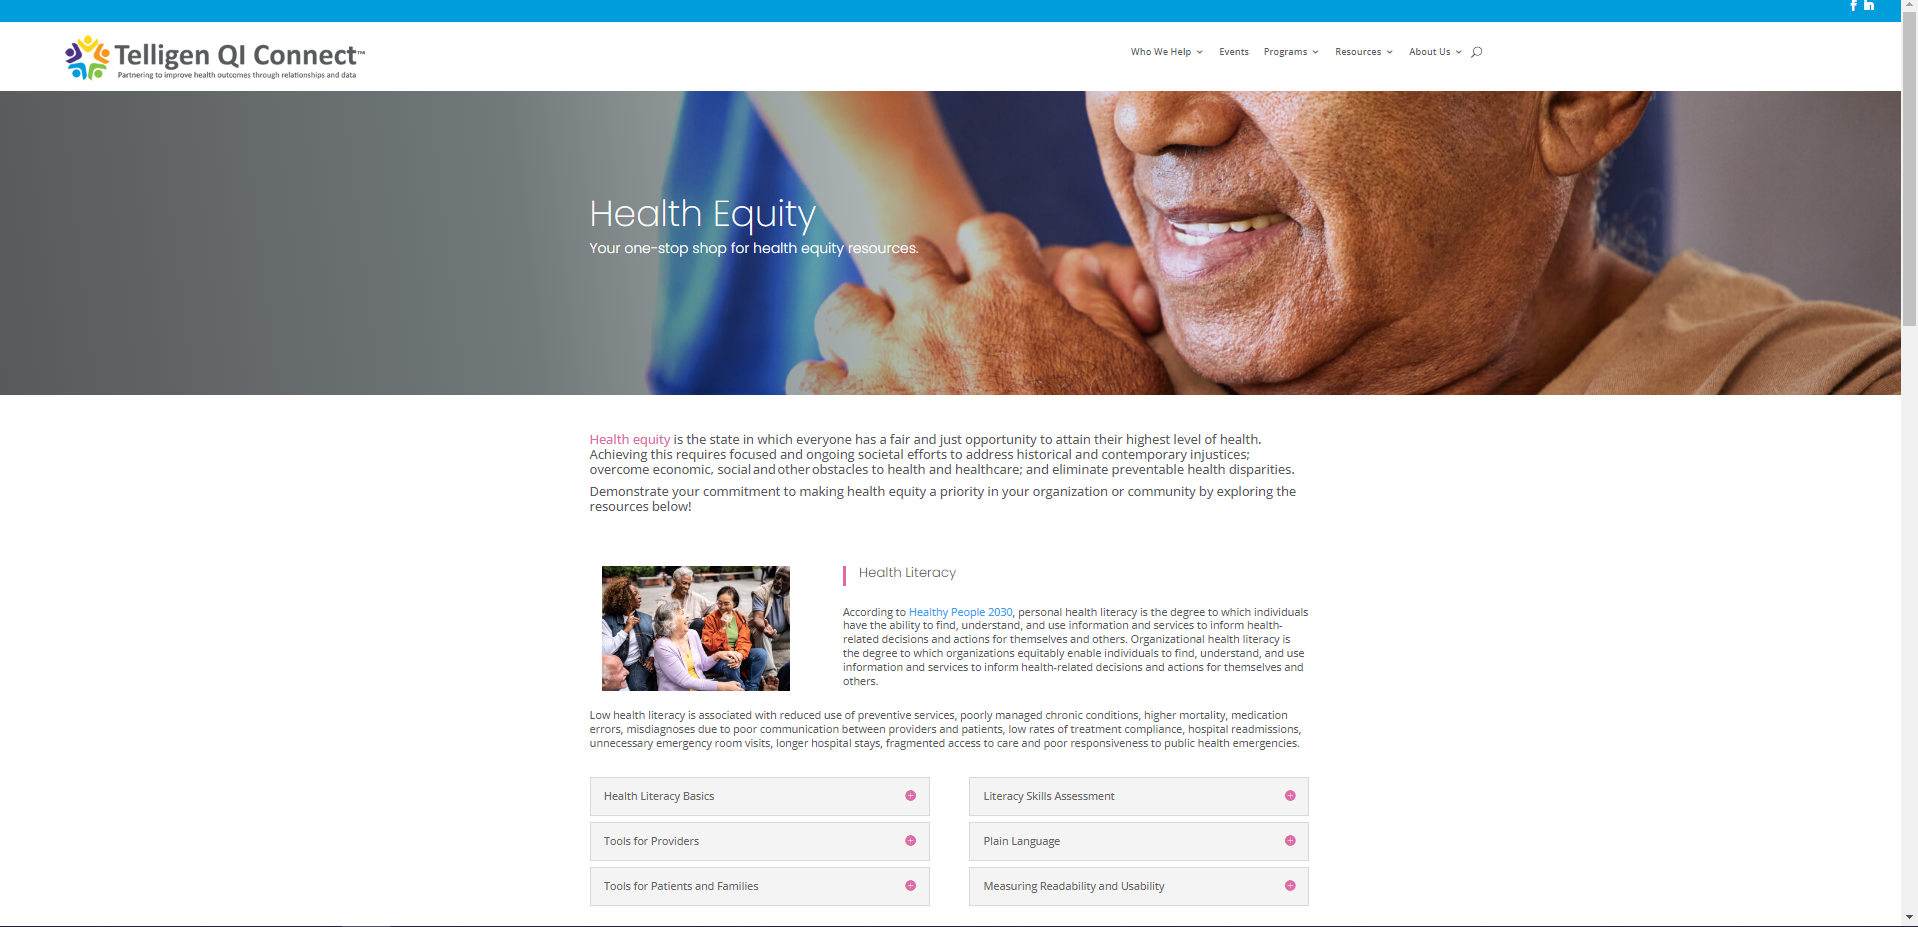 Banner image shows an older adult smiling and holding a health care provider's hand on his shoulder. 